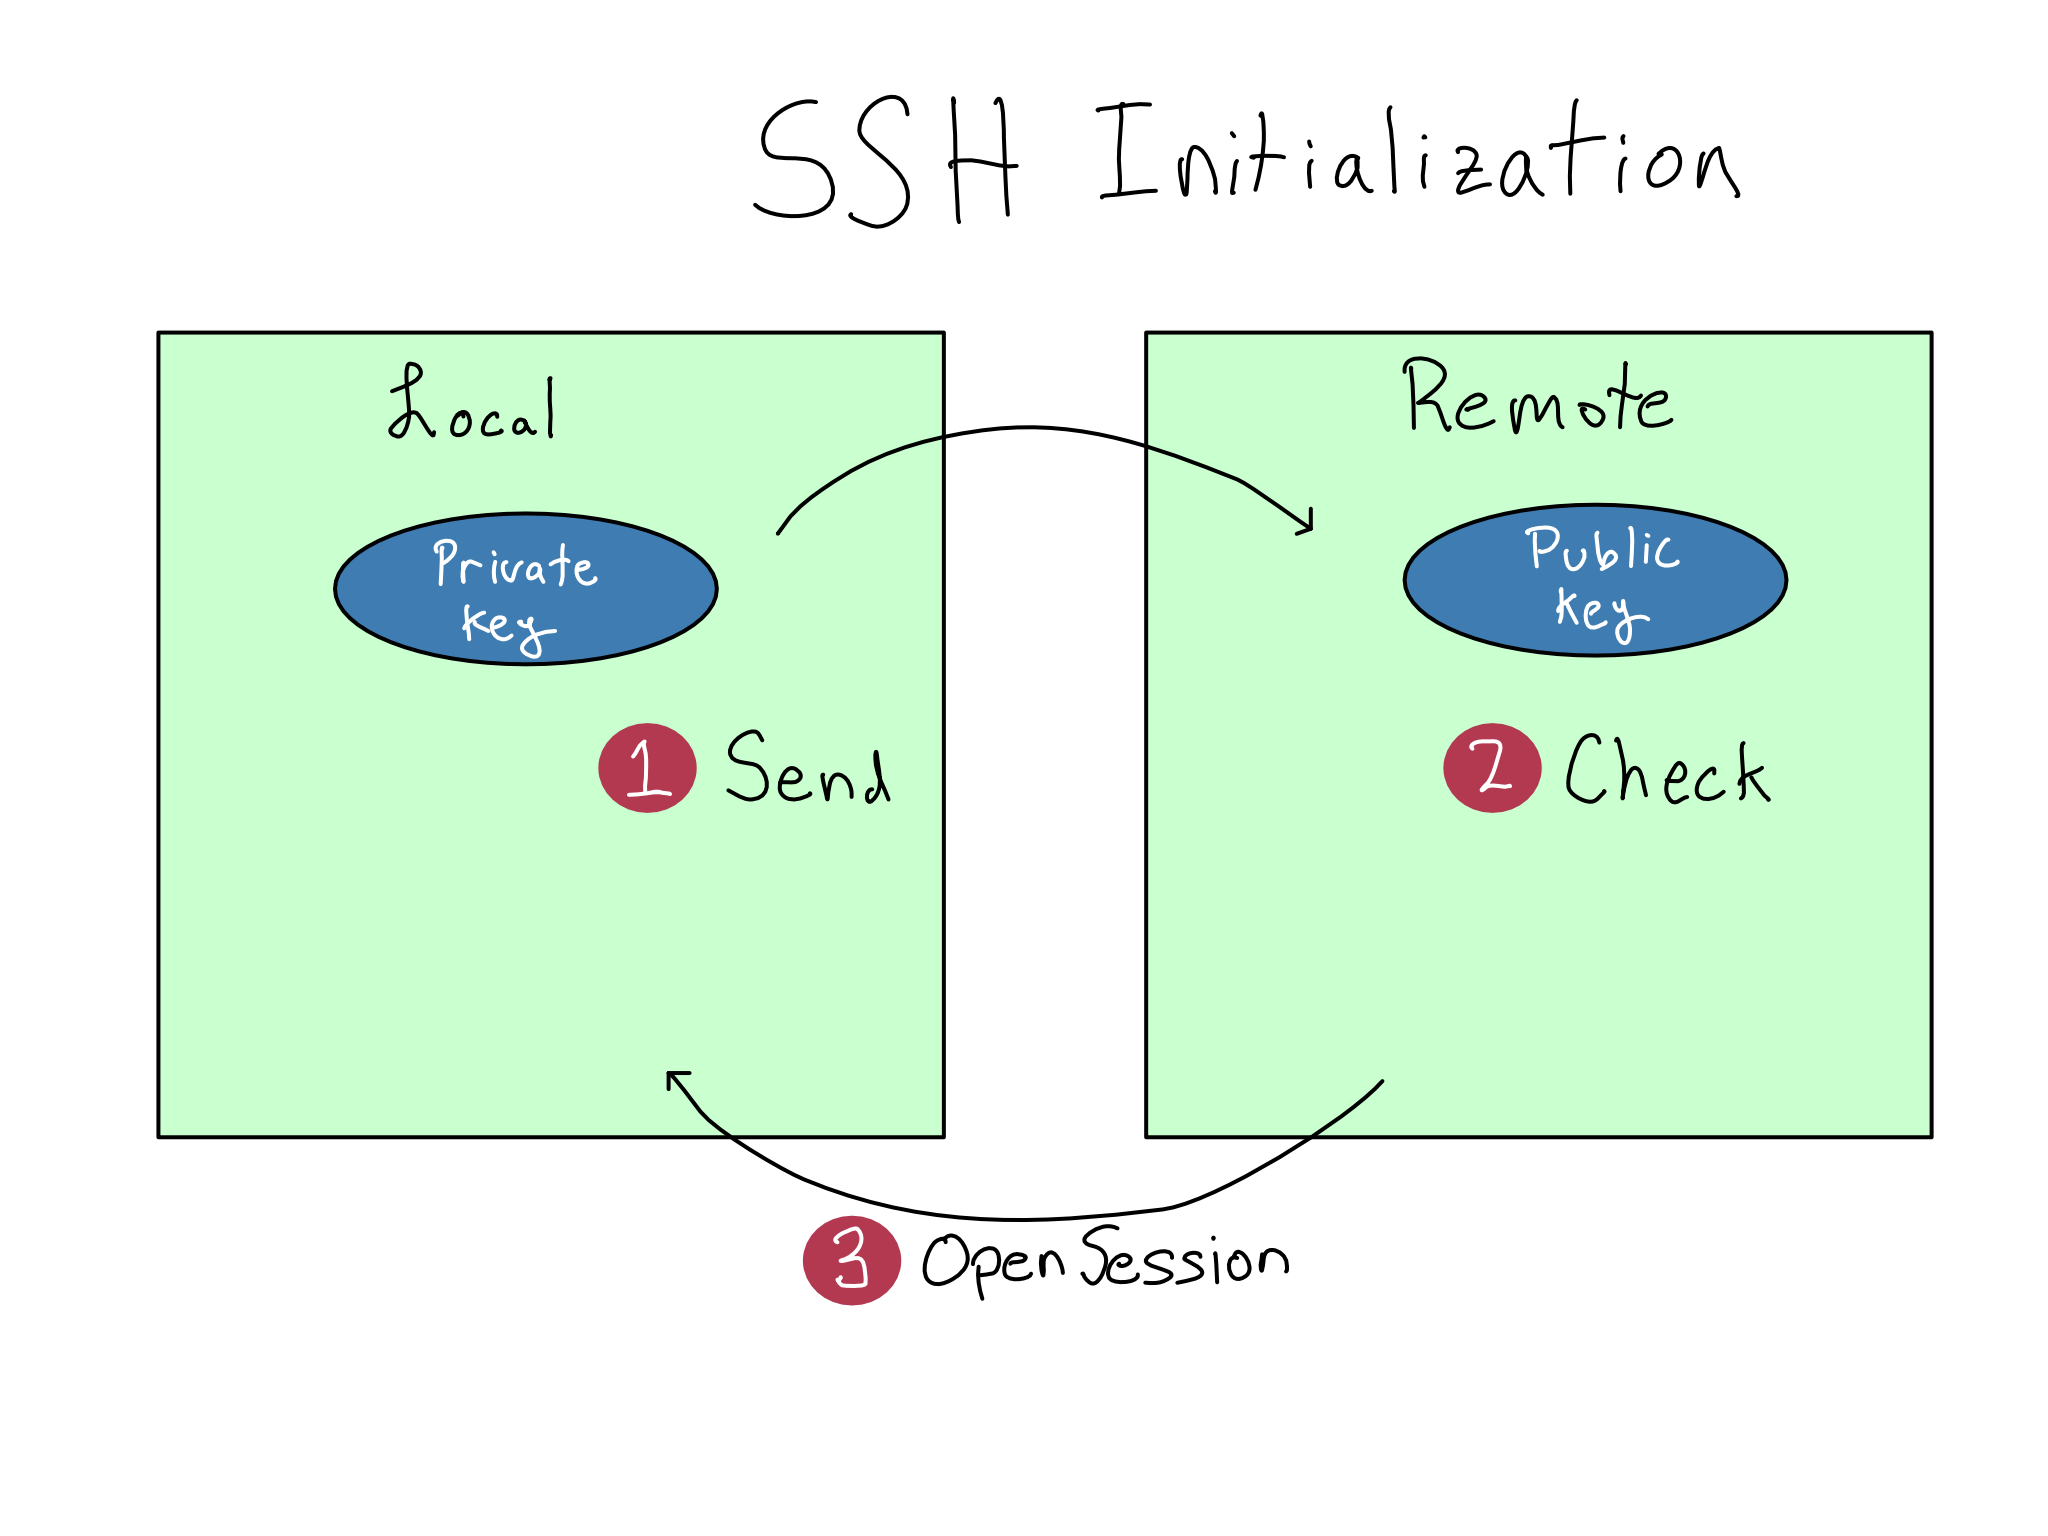 A diagram of \index{SSH}SSH initialization. The local host sends a request signed by the private key, the remote checks against the public key, and then opens the session.